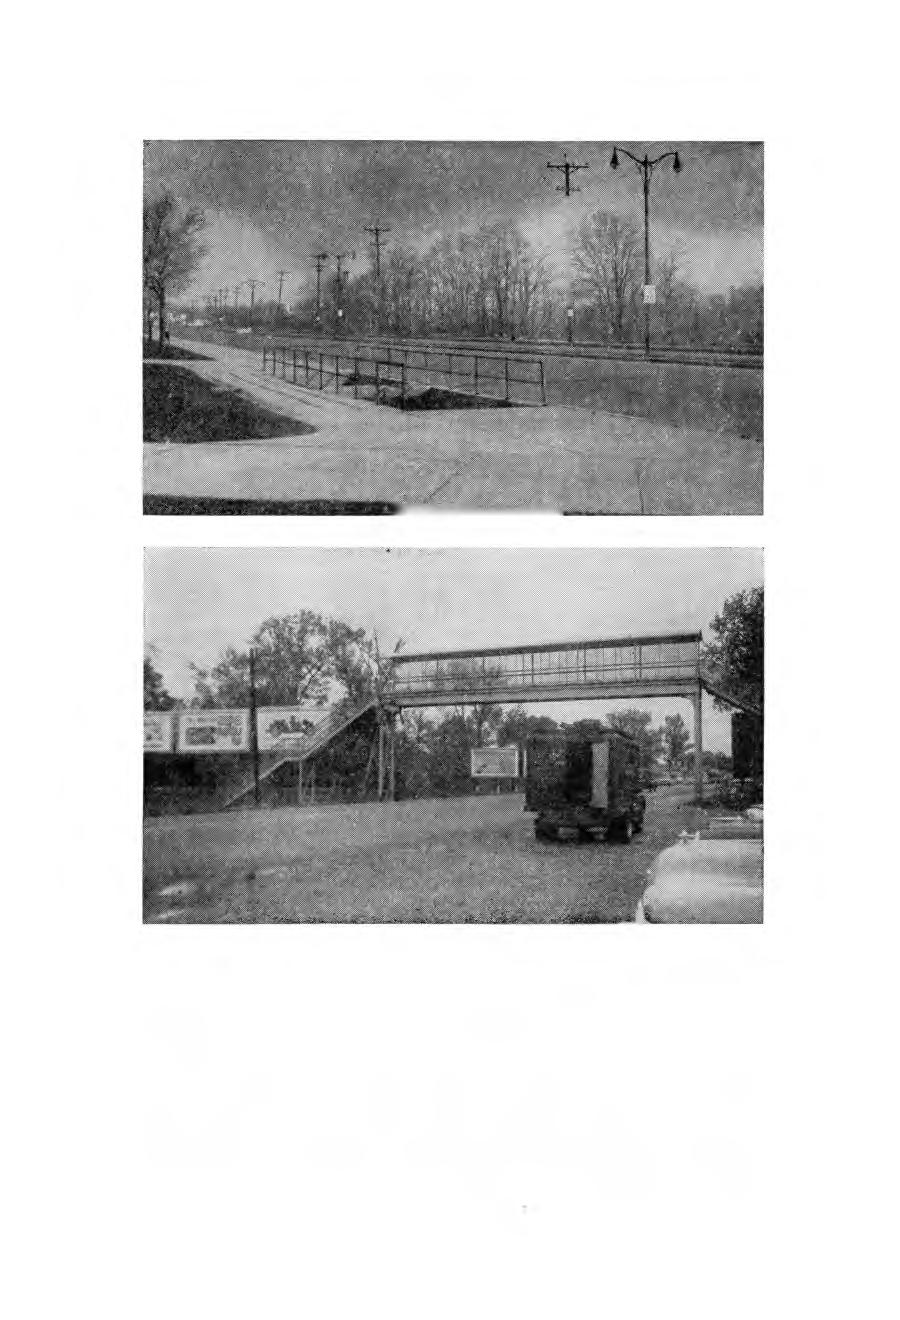 213 Fig. 12. Underpass school crossing at Richmond. Fig. 13. Overpass school crossing at Evansville.